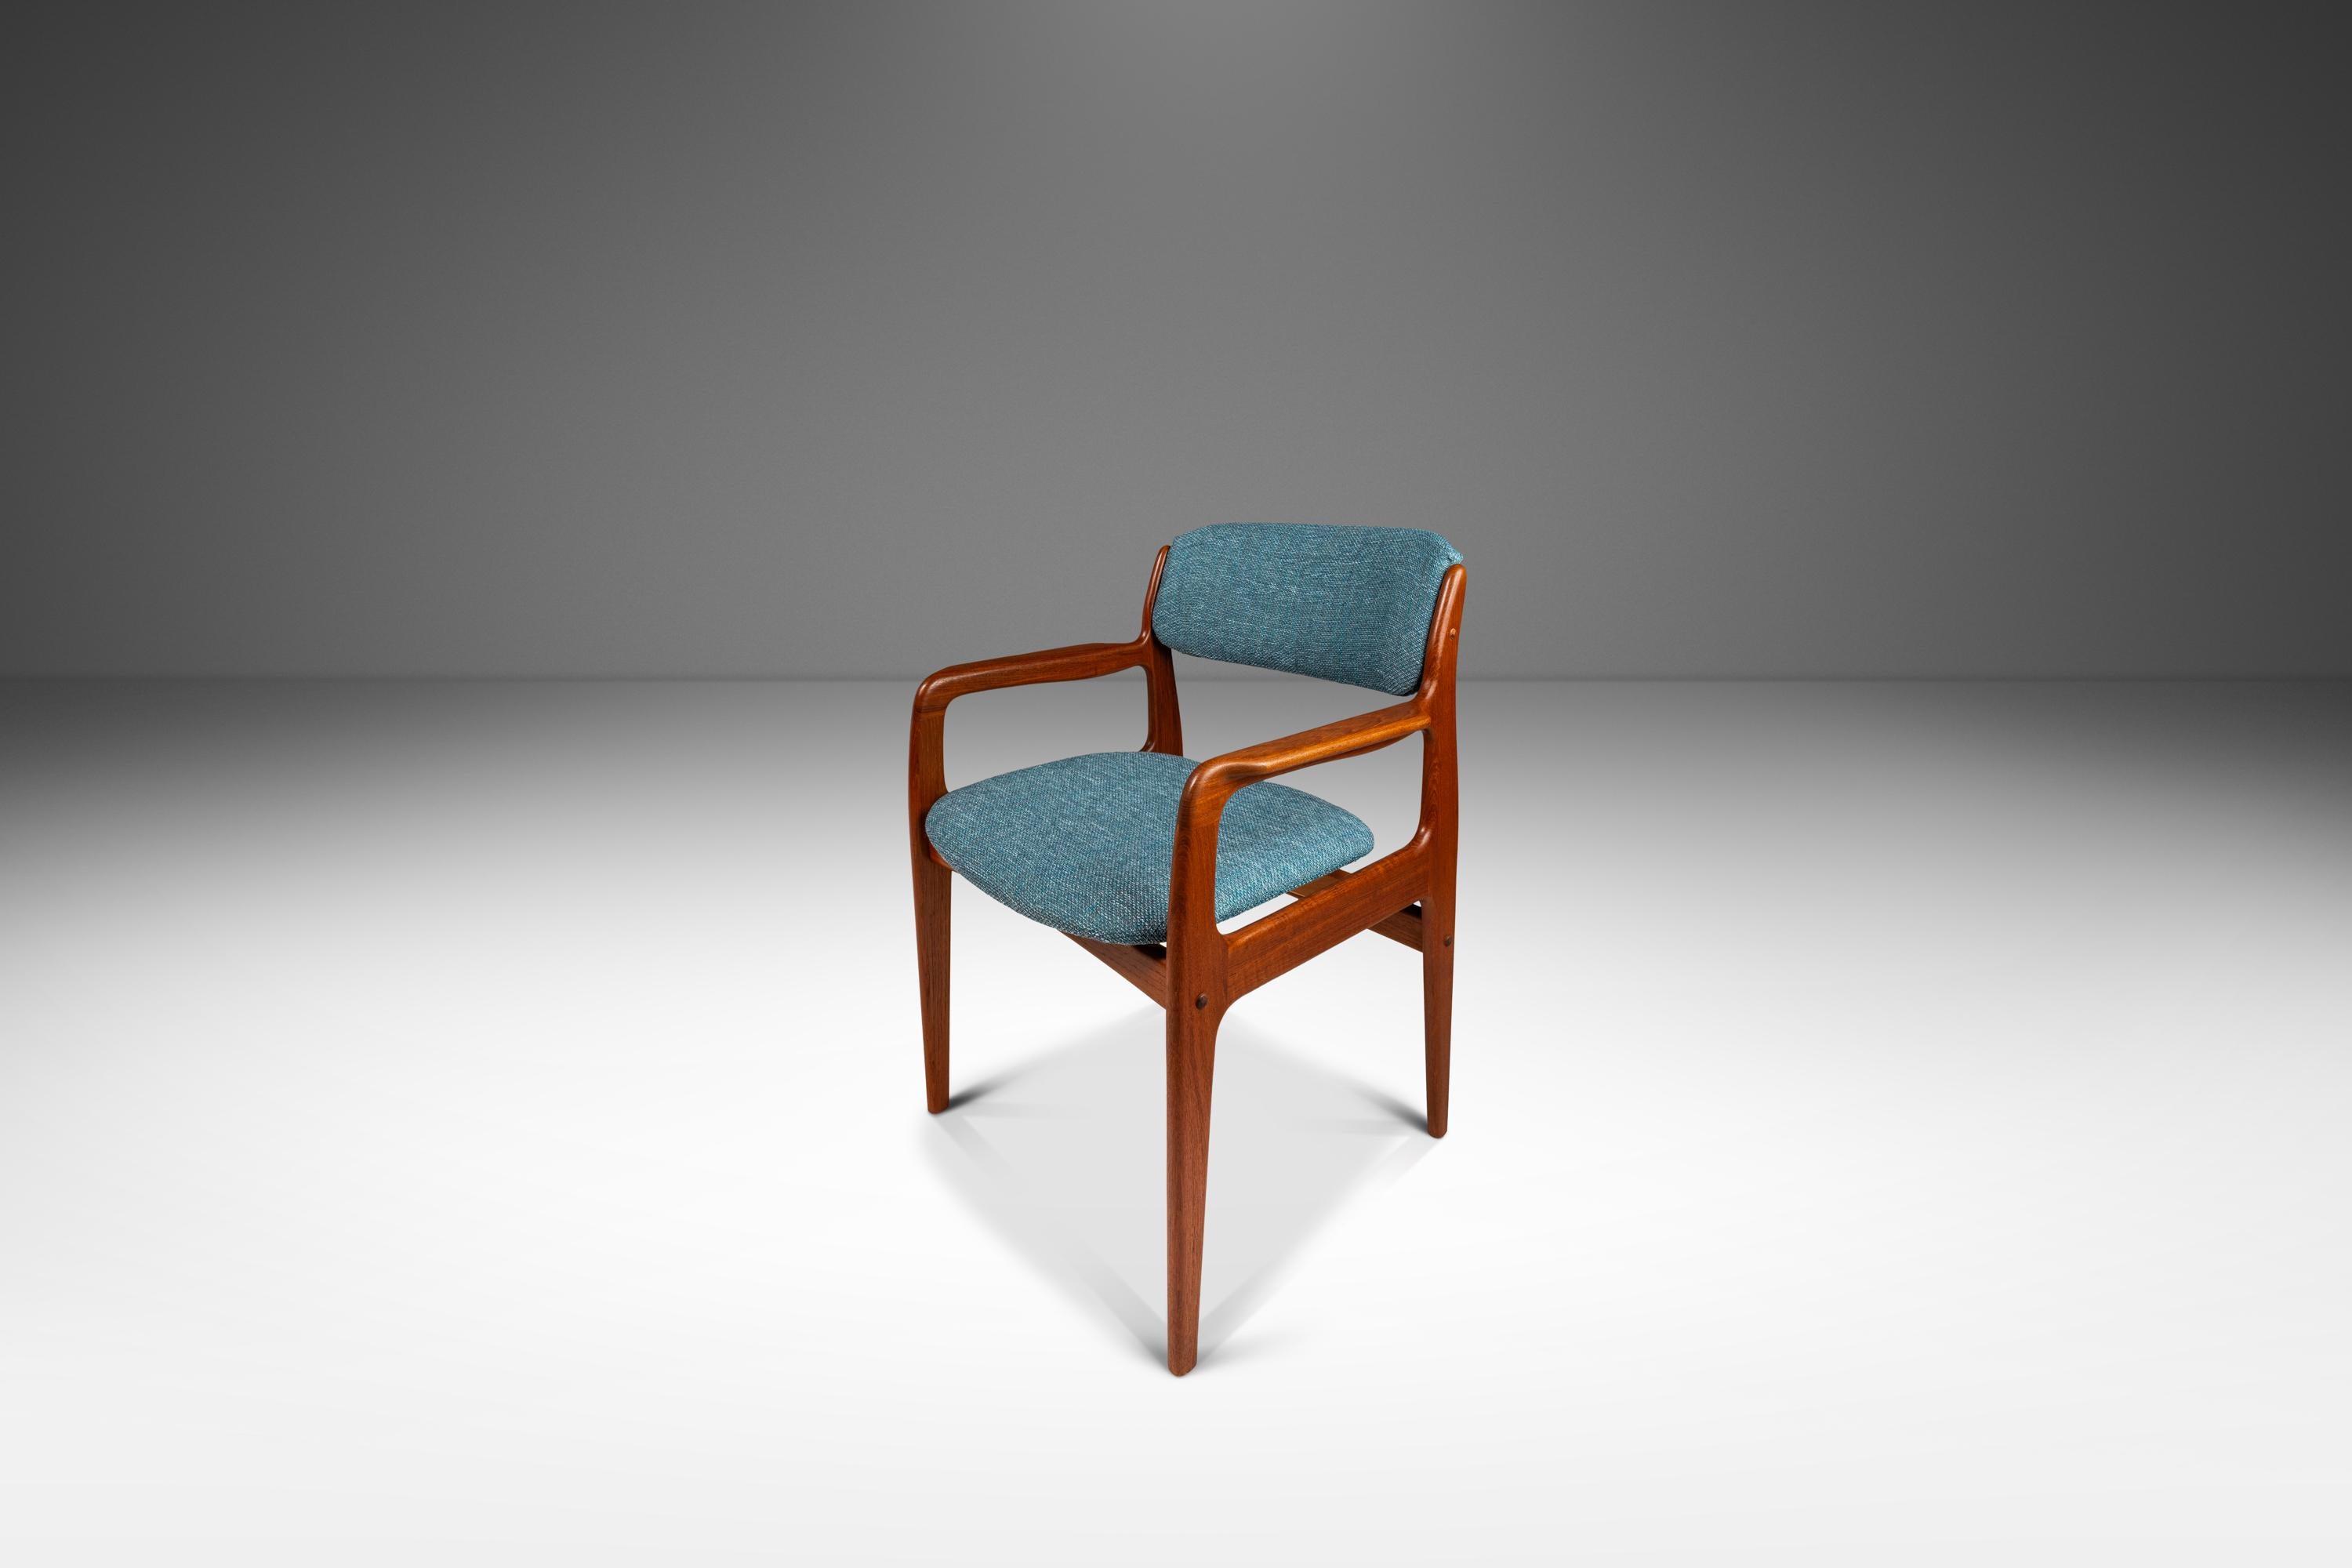 Introducing a newly restored Danish Modern armchair designed by the influential Benny Linden. Constructed from a frame of solid Burmese teak with exceptional old-growth woodgrains and featuring new heavy knit, vintage-feeling sky blue upholstery